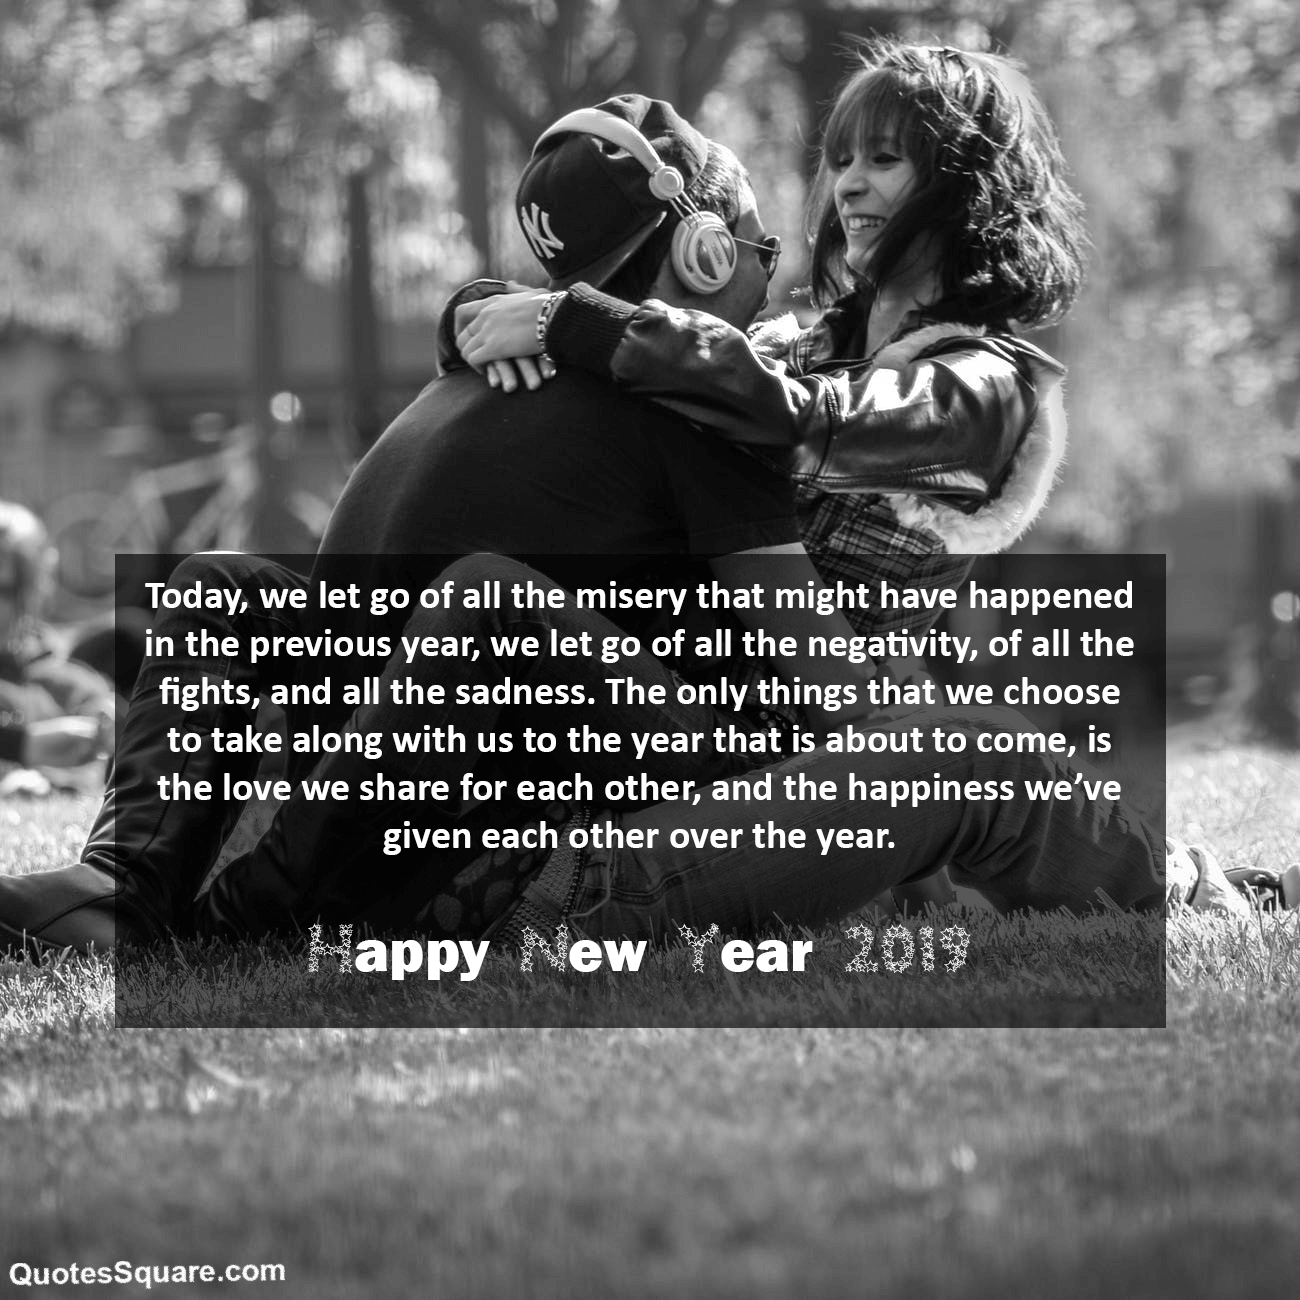 30 Romantic Happy New Year 21 Wishes For Boyfriend Quotes Square